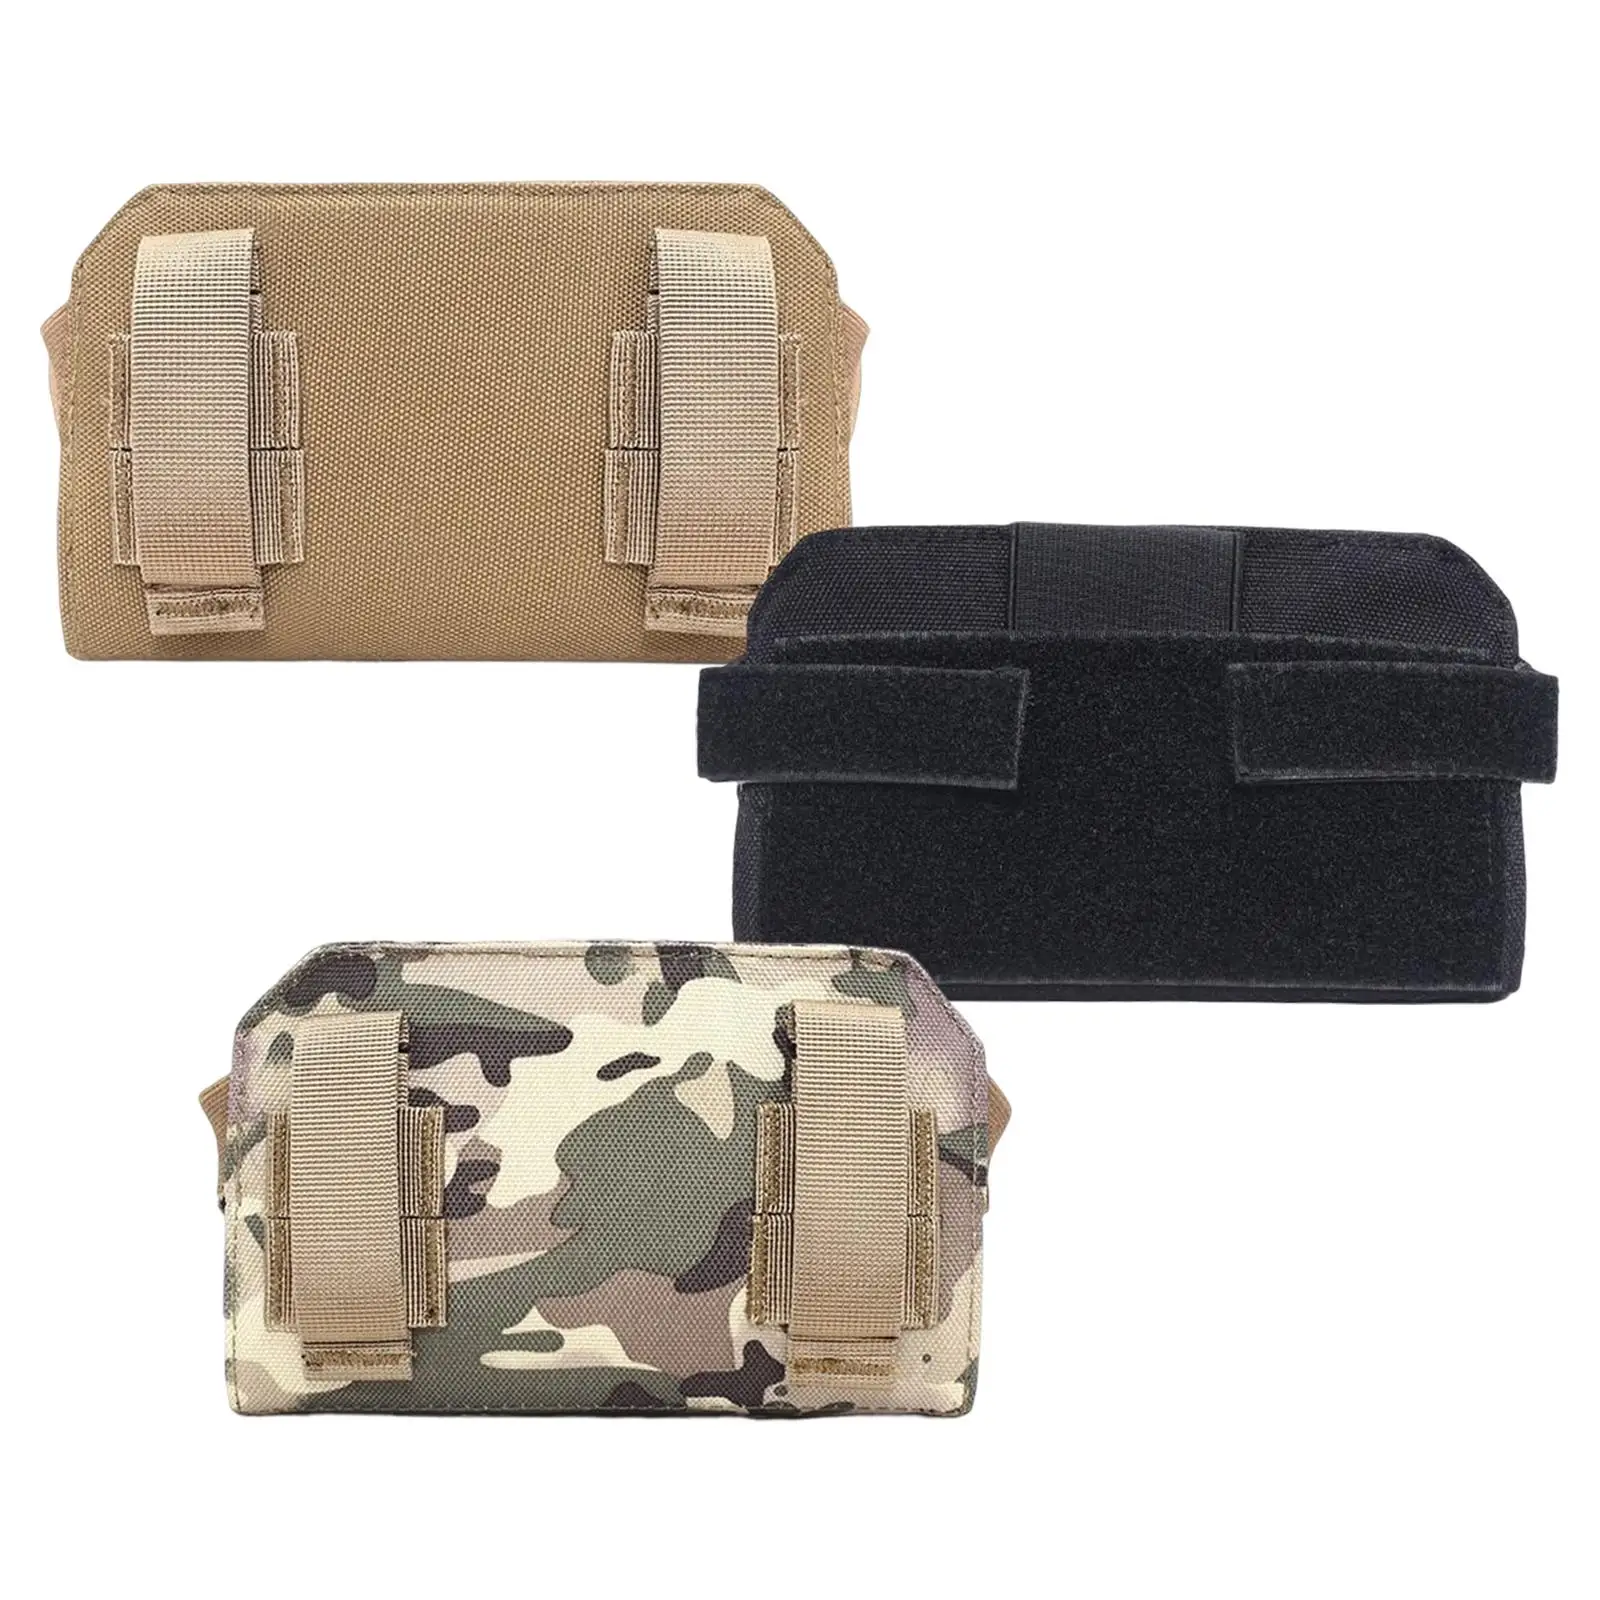  Map Bag Organizer Pocket Pouch Mobile Phone  Durable Admin Pouch for Hunting Shooting Hiking